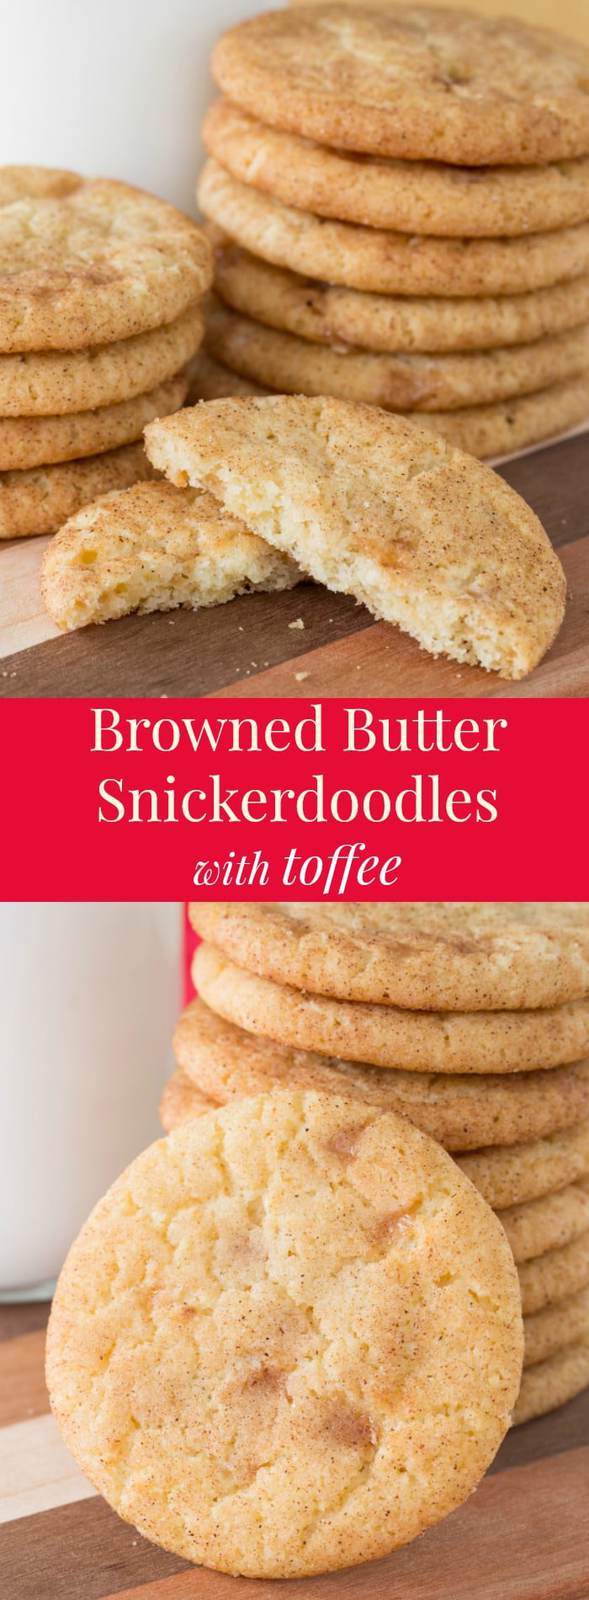 Browned Butter Snickerdoodles with Toffee - a new twist on your favorite classic cookie recipe with the nutty taste of brown butter and Heath bar bits. Add them to your Christmas cookies baking plans! #snickerdoodles #cookies #christmascookies #brownbutter #brownedbutter